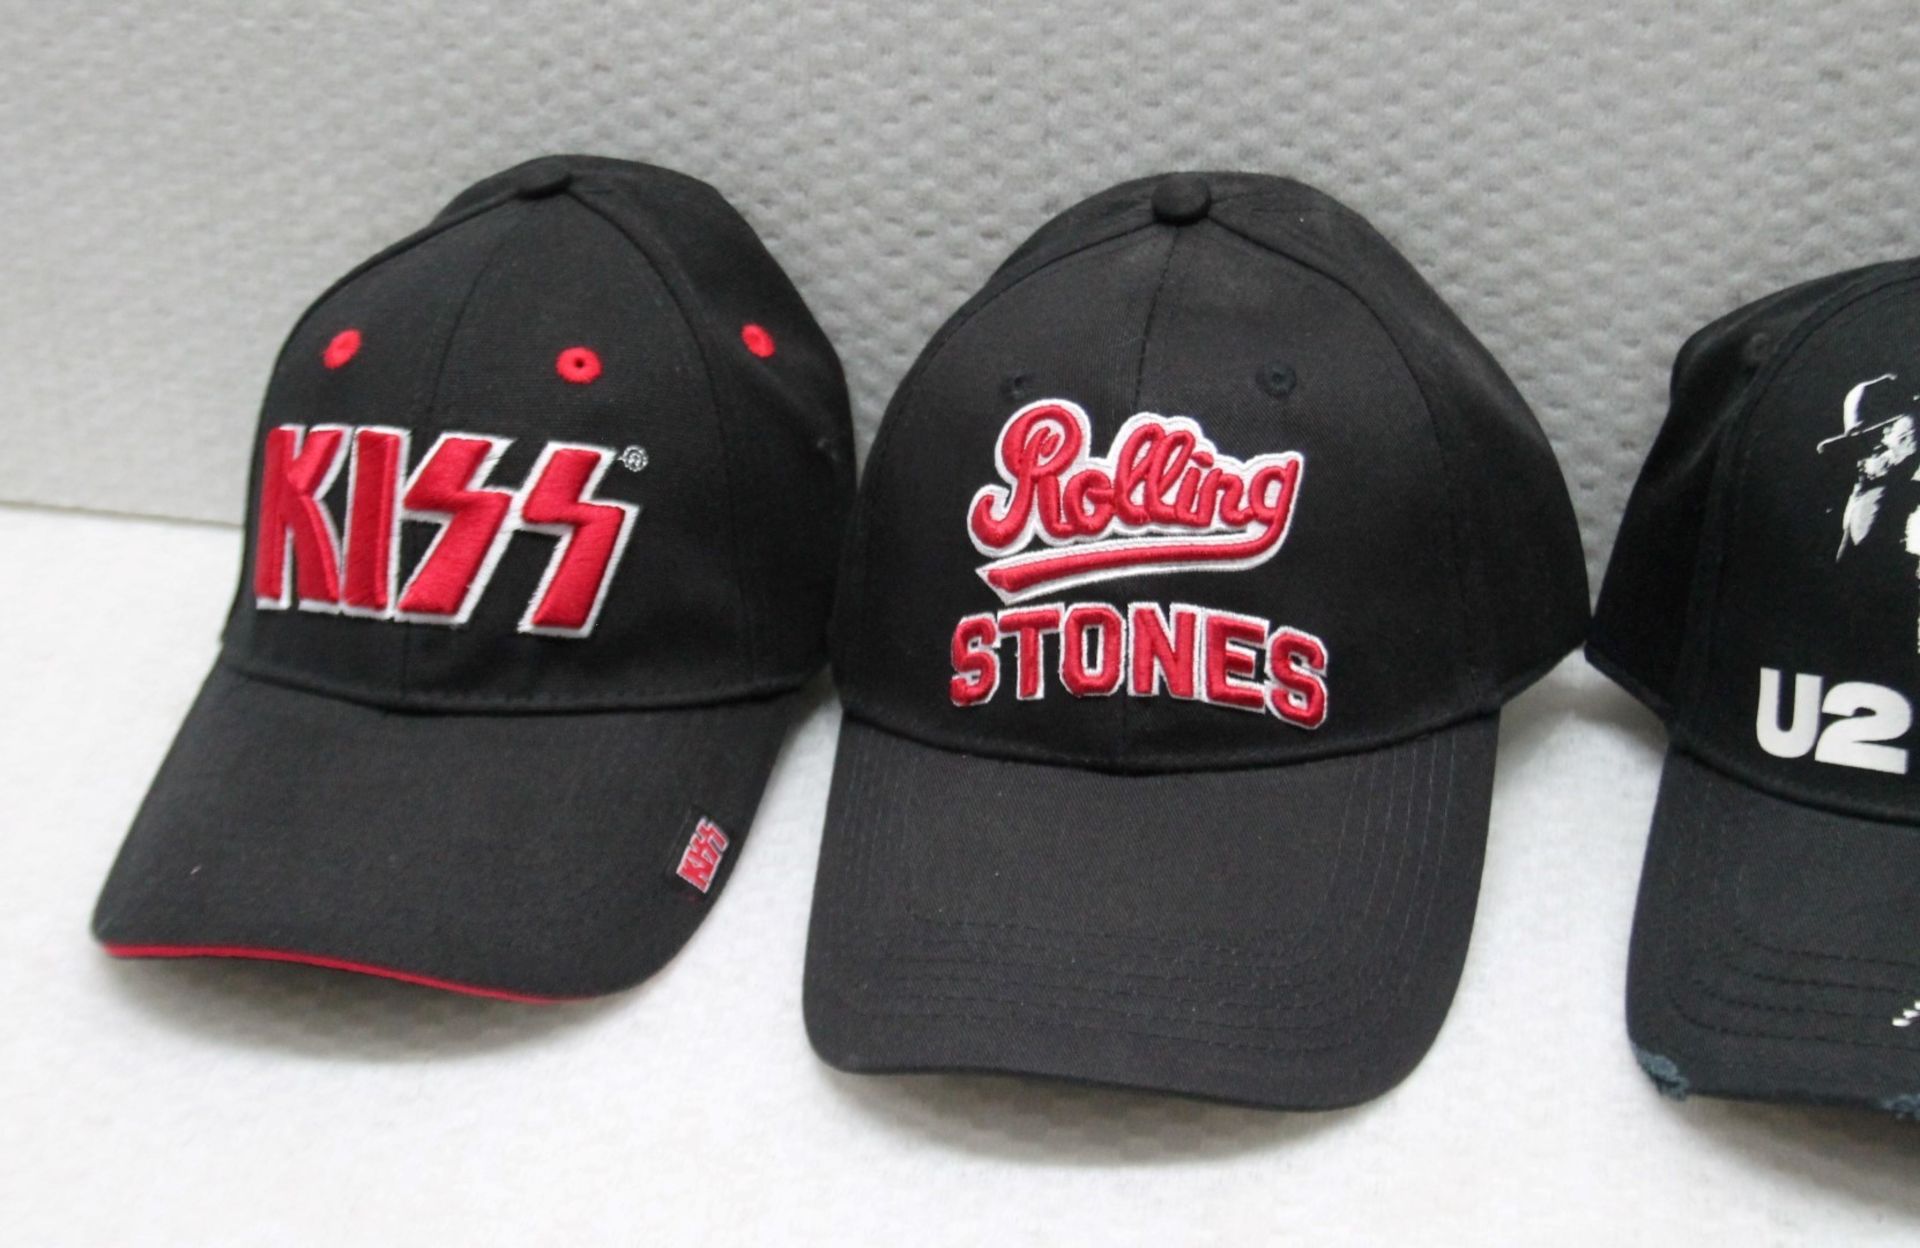 5 x Assorted Baseball Cap Featuring Kiss, Rolling Stones, U2, Metallica and Ozzy Osbourne - Colour: - Image 9 of 9